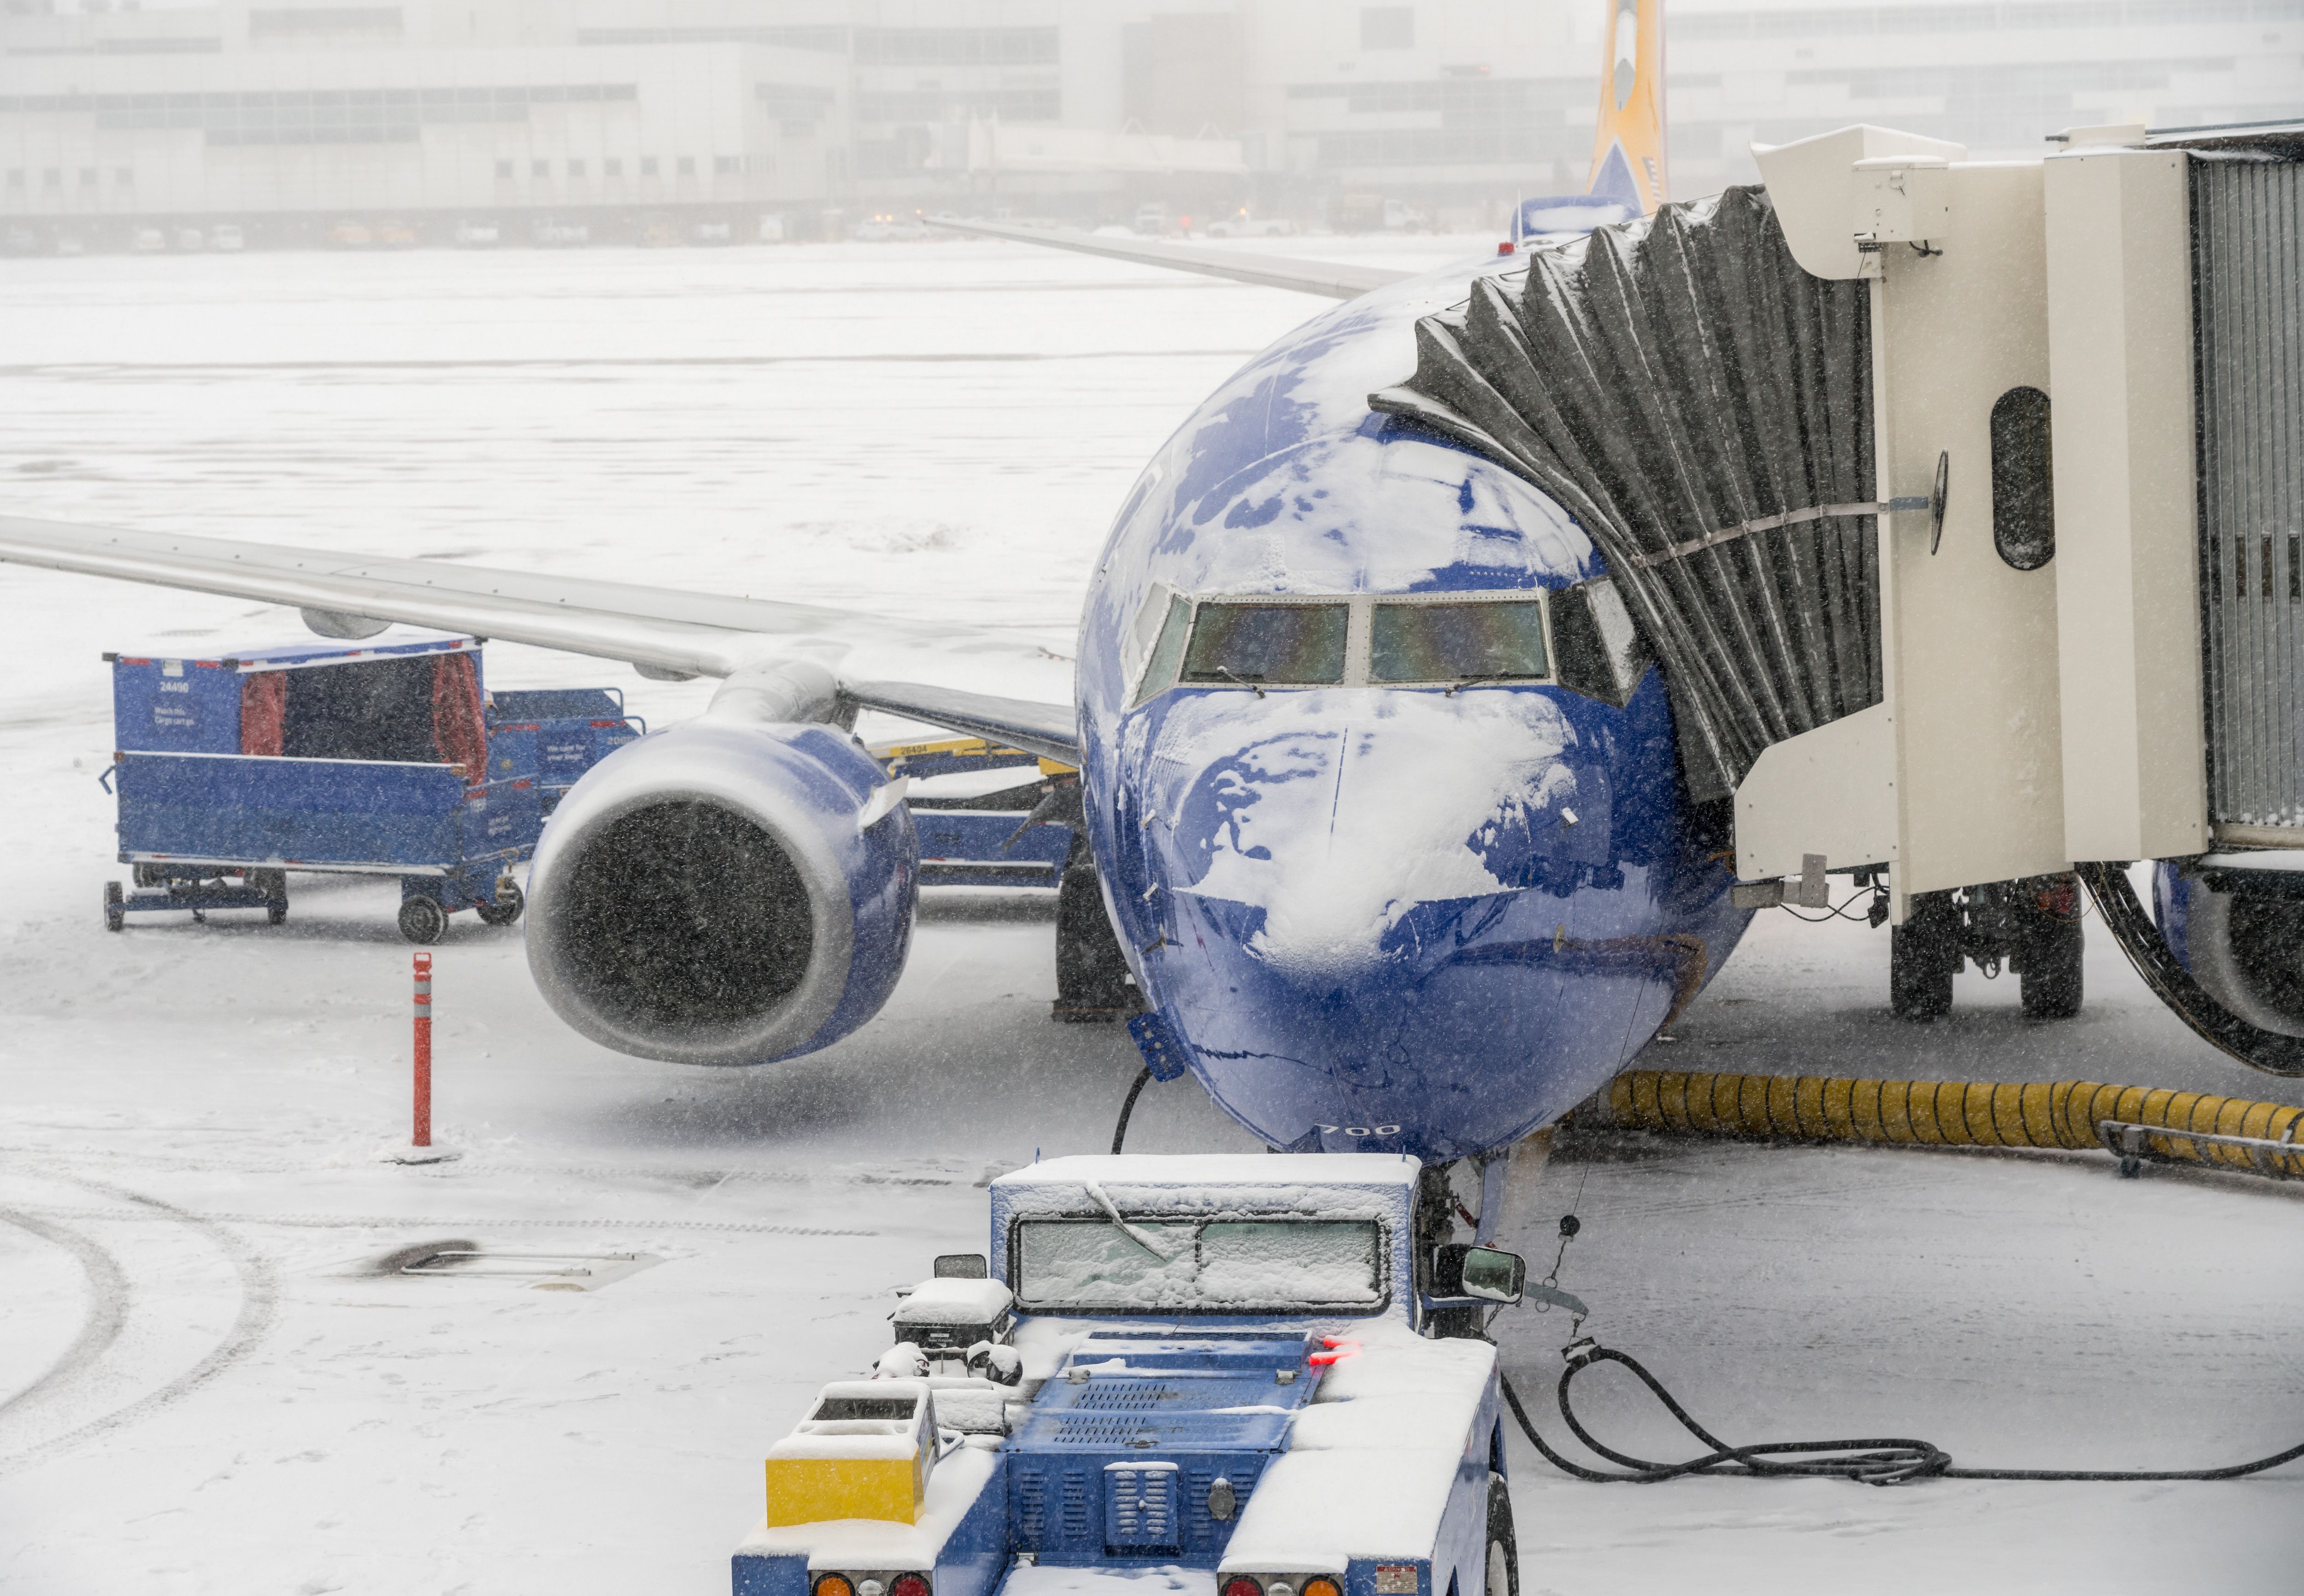 Southwest Airlines Boeing 737 loaded at the jetway during snow storm at Denver International Airport